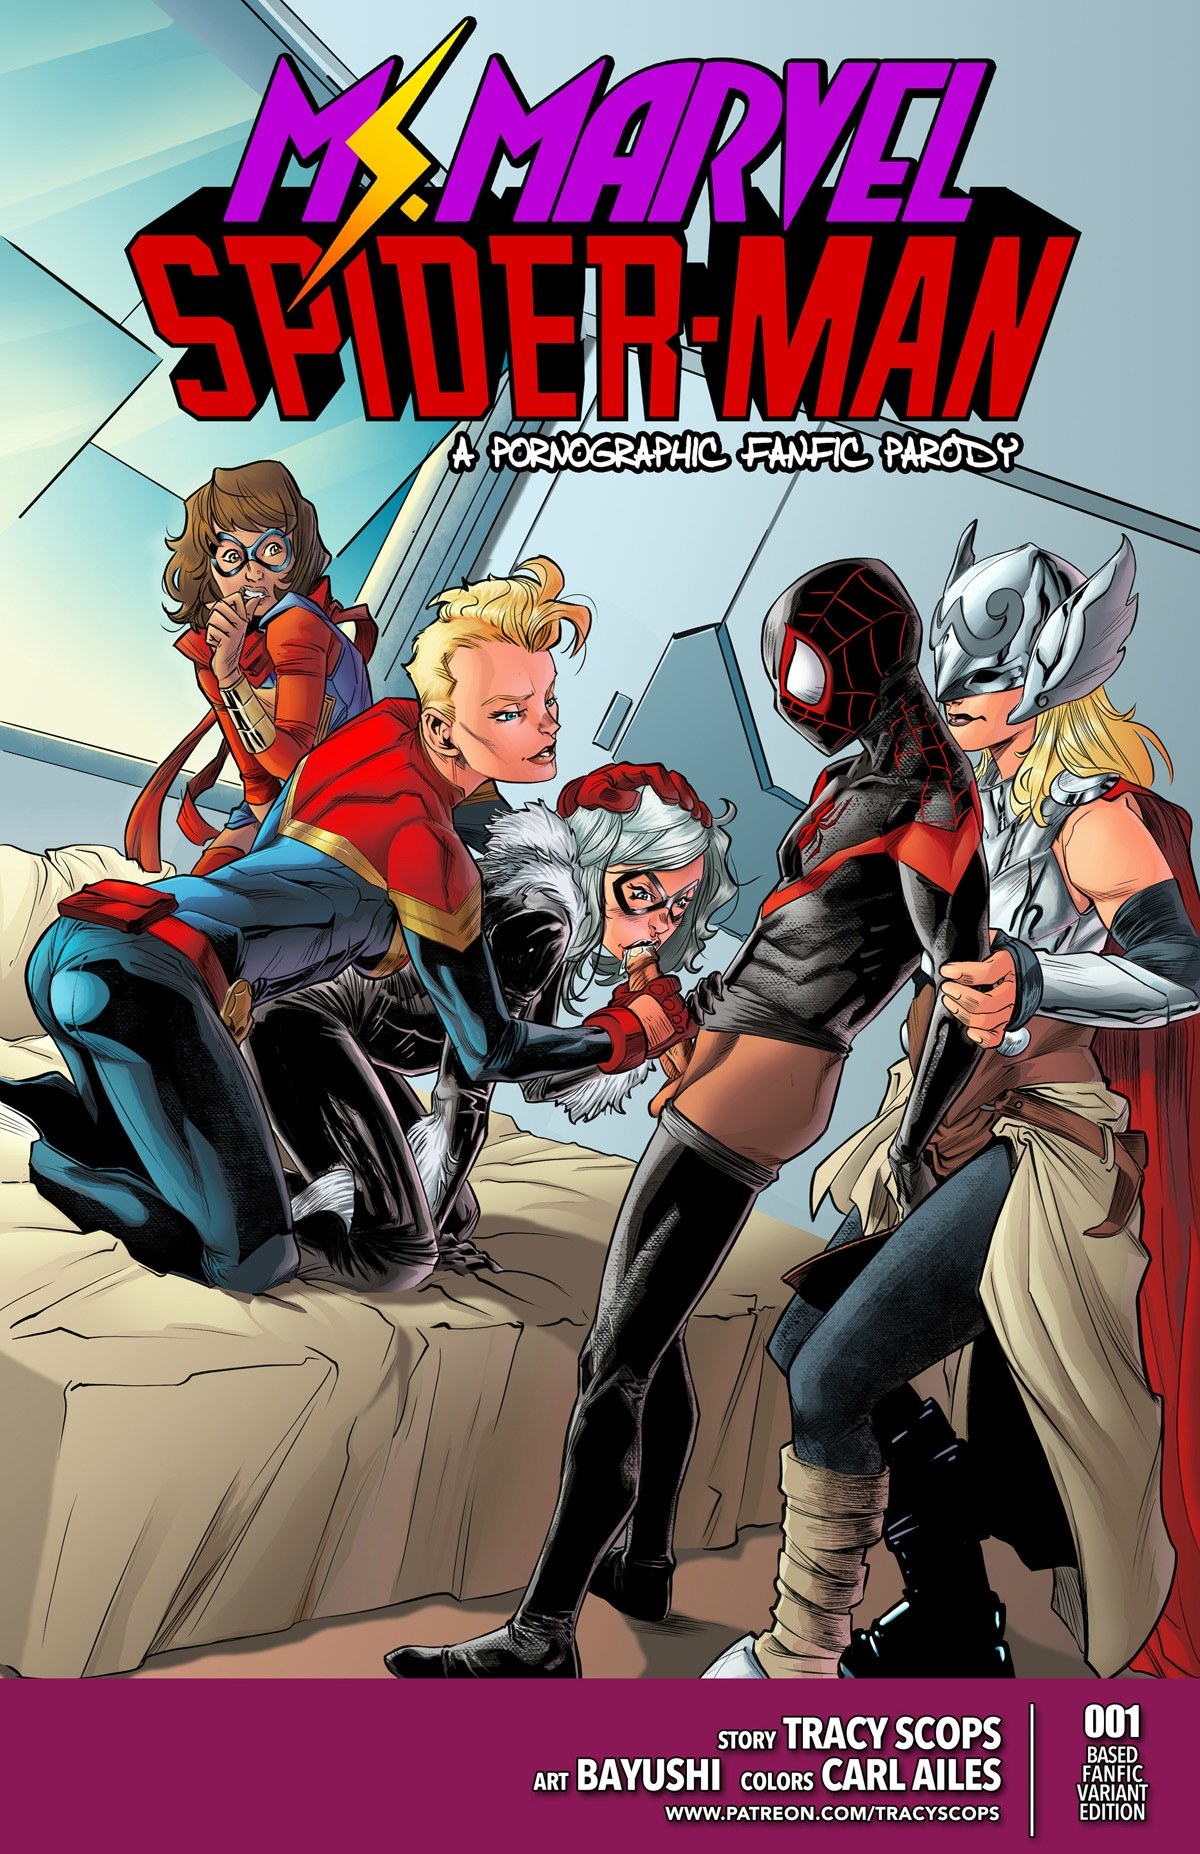 New comic by Tracy Scops - Miss Marvel Spider Man - English/Spanish Porn Comics